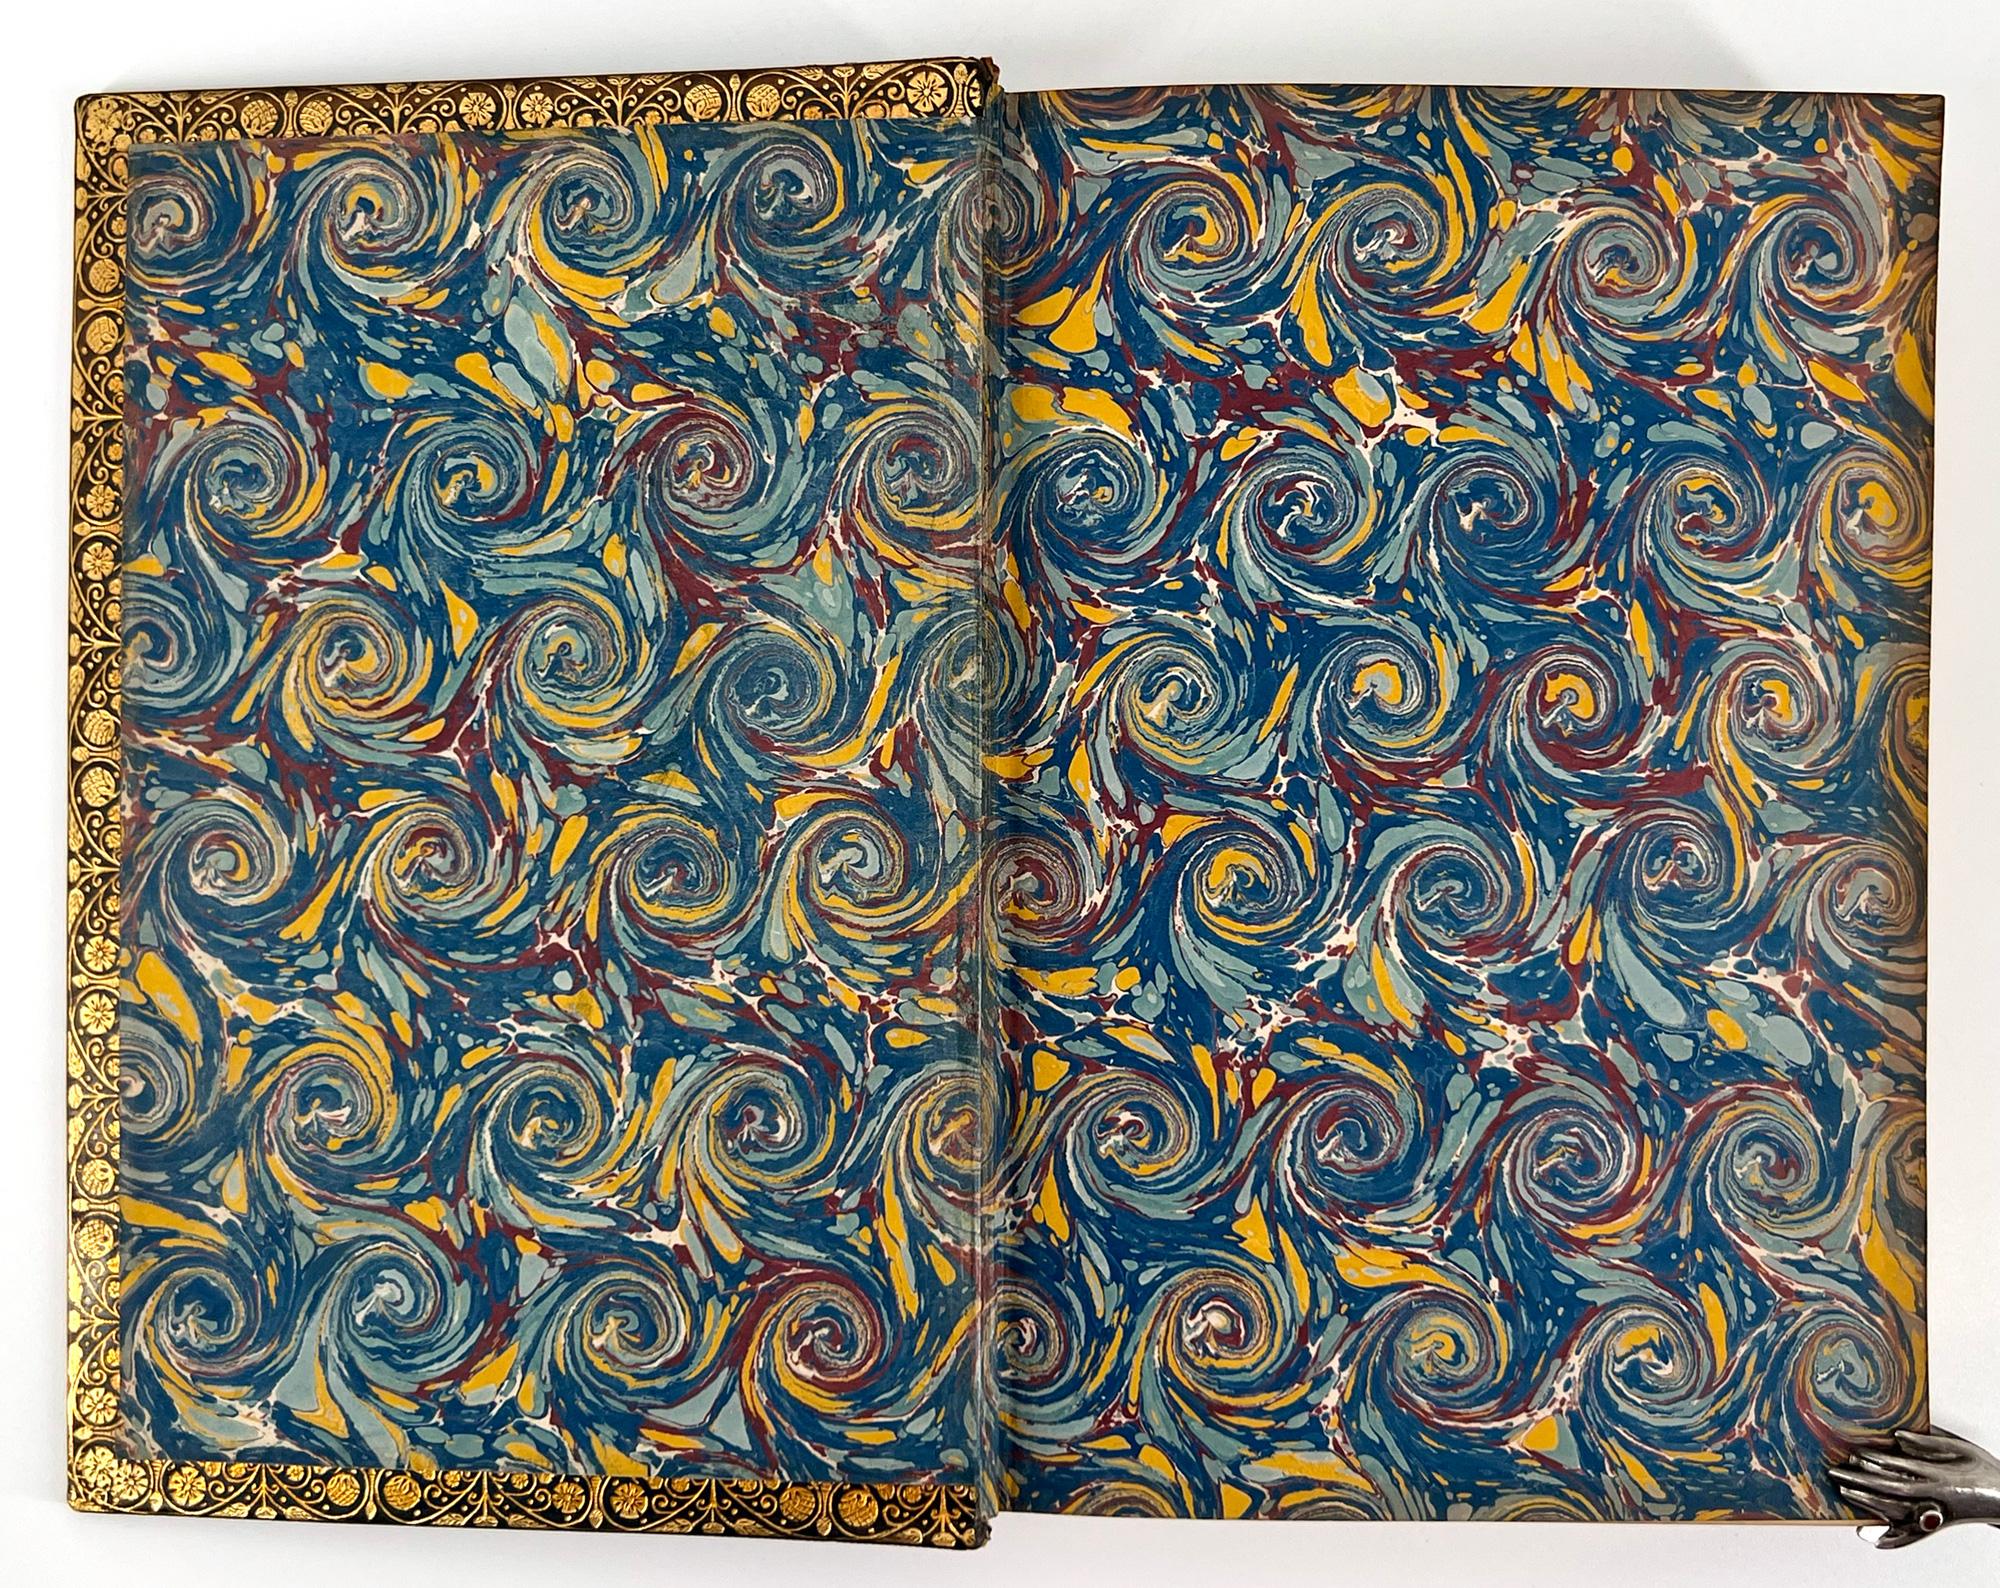 English Through the Looking Glass by Lewis Carroll - Beautiful binding